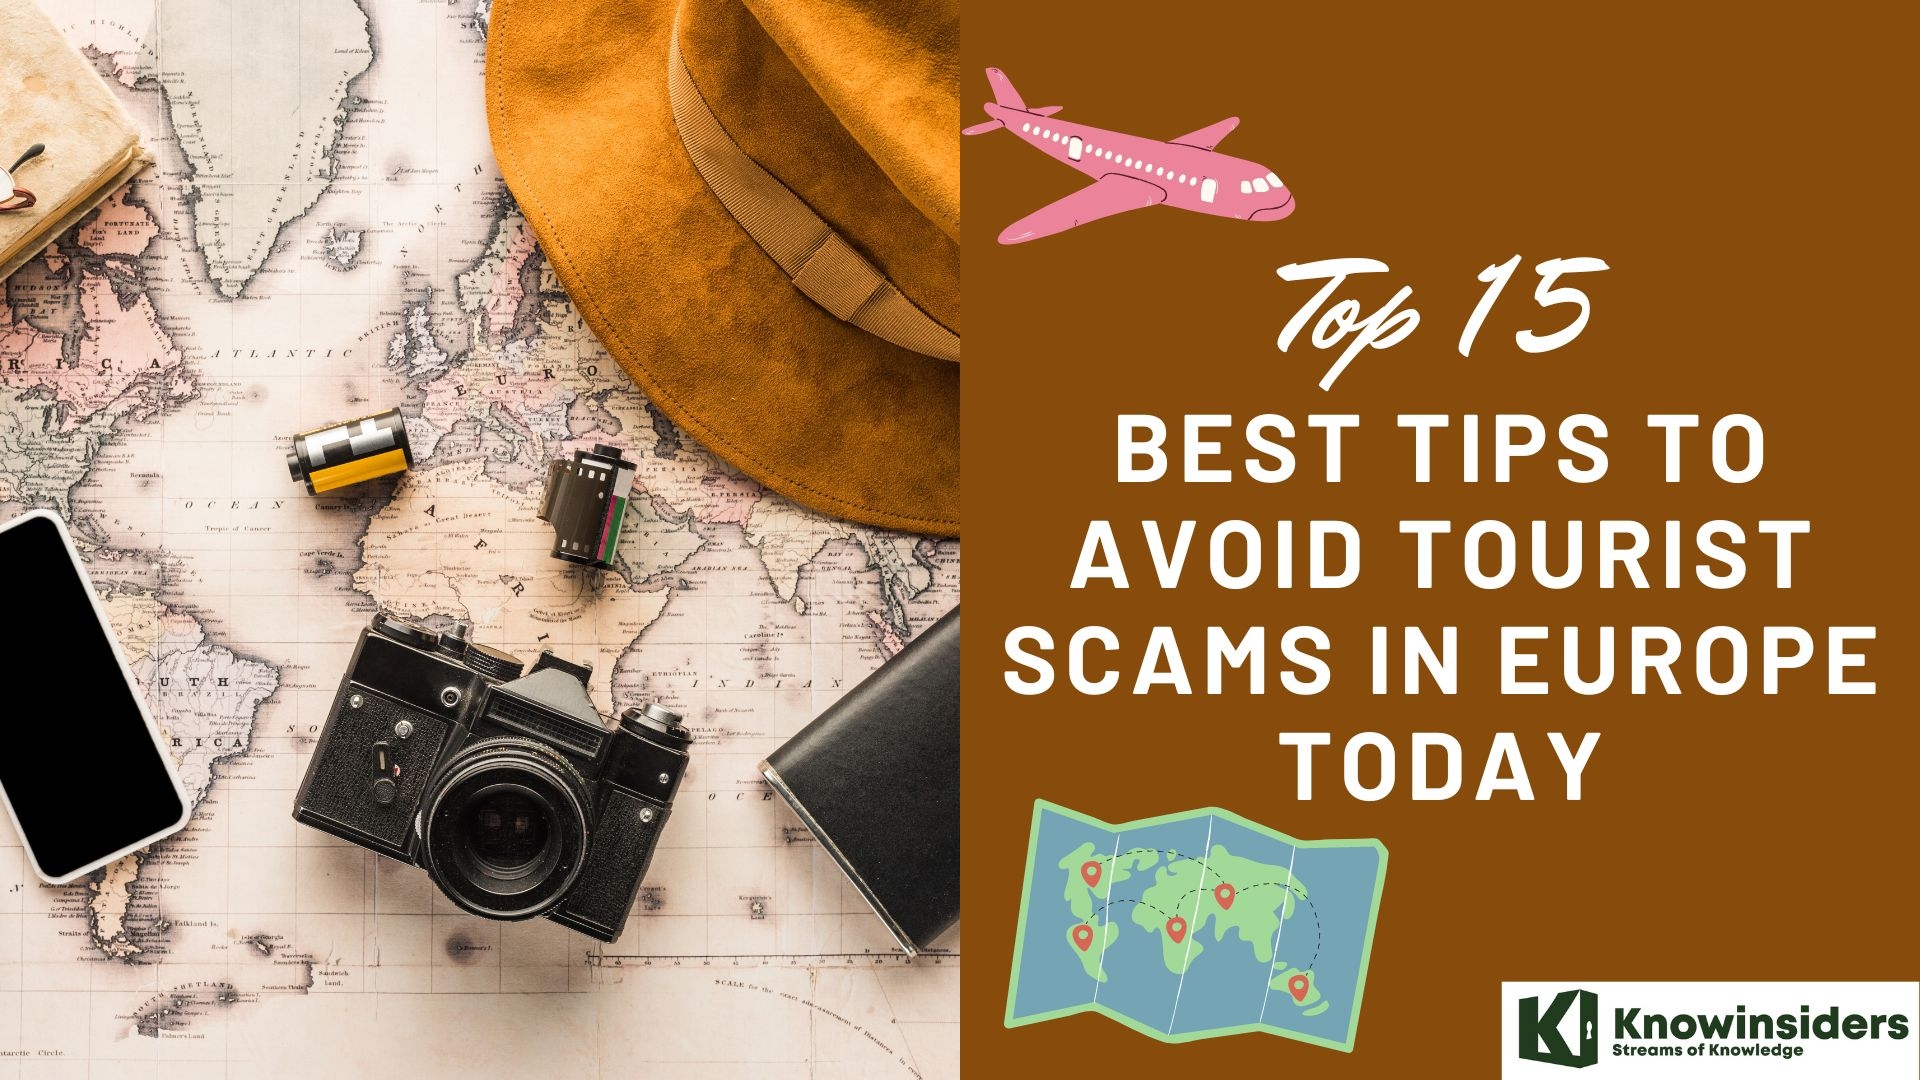 Top 15 Best Tips to Avoid Tourist Scams in Europe Today Knowinsiders.com